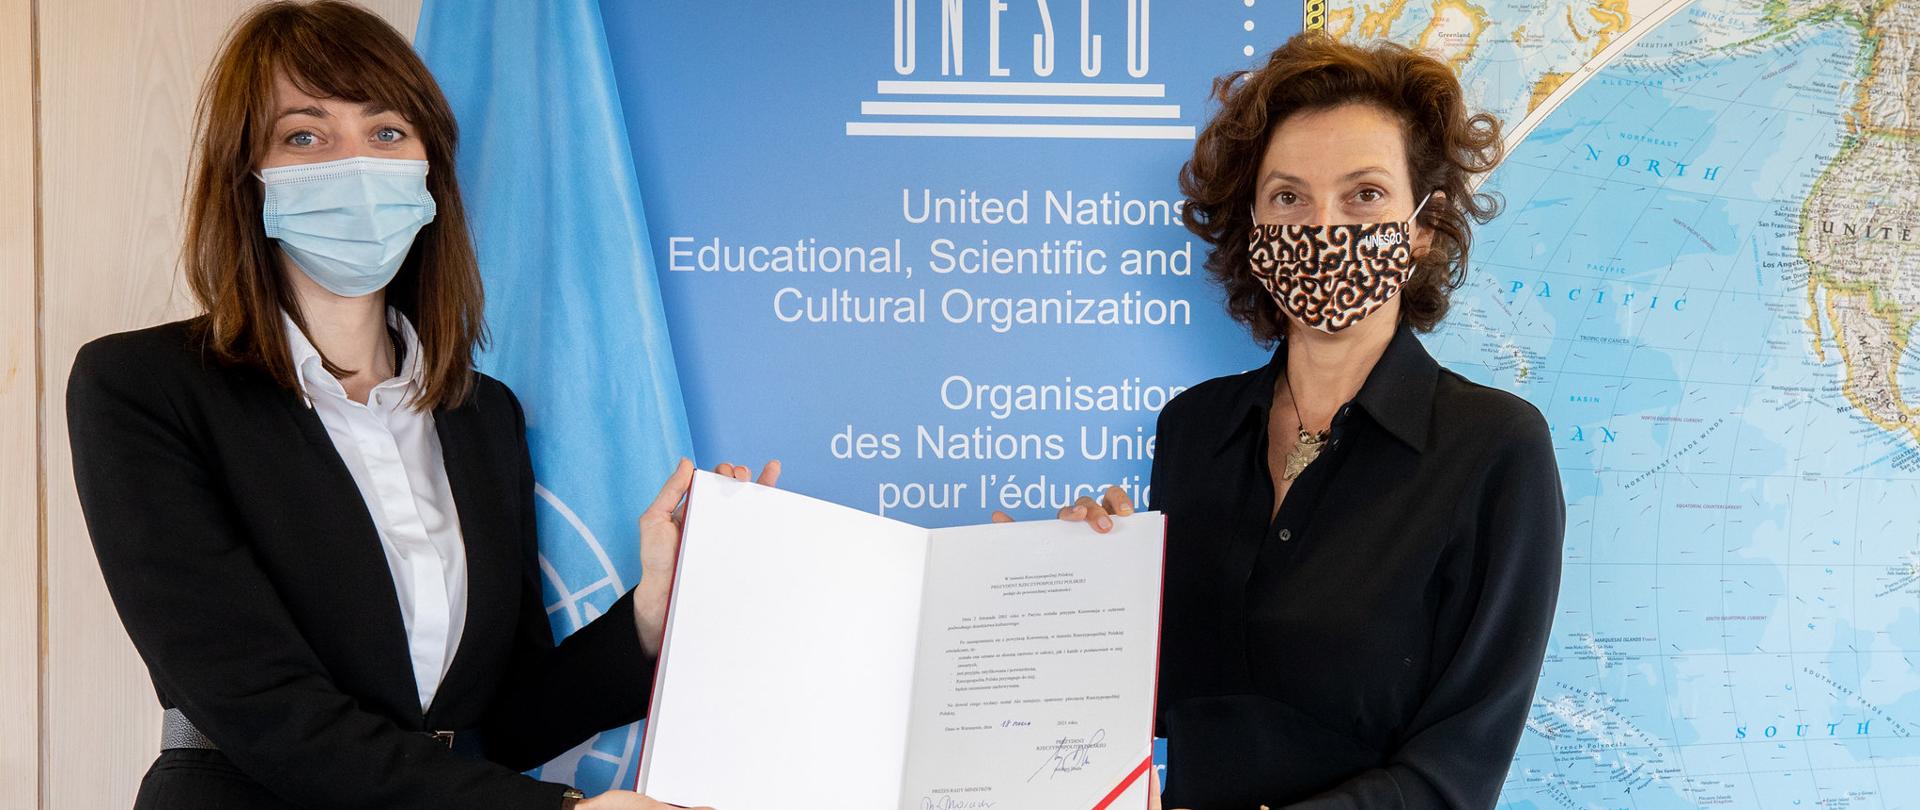 Poland deposited its instrument of ratification to become a Party to the UNESCO 2001 Convention on the Protection of the Underwater Cultural Heritage